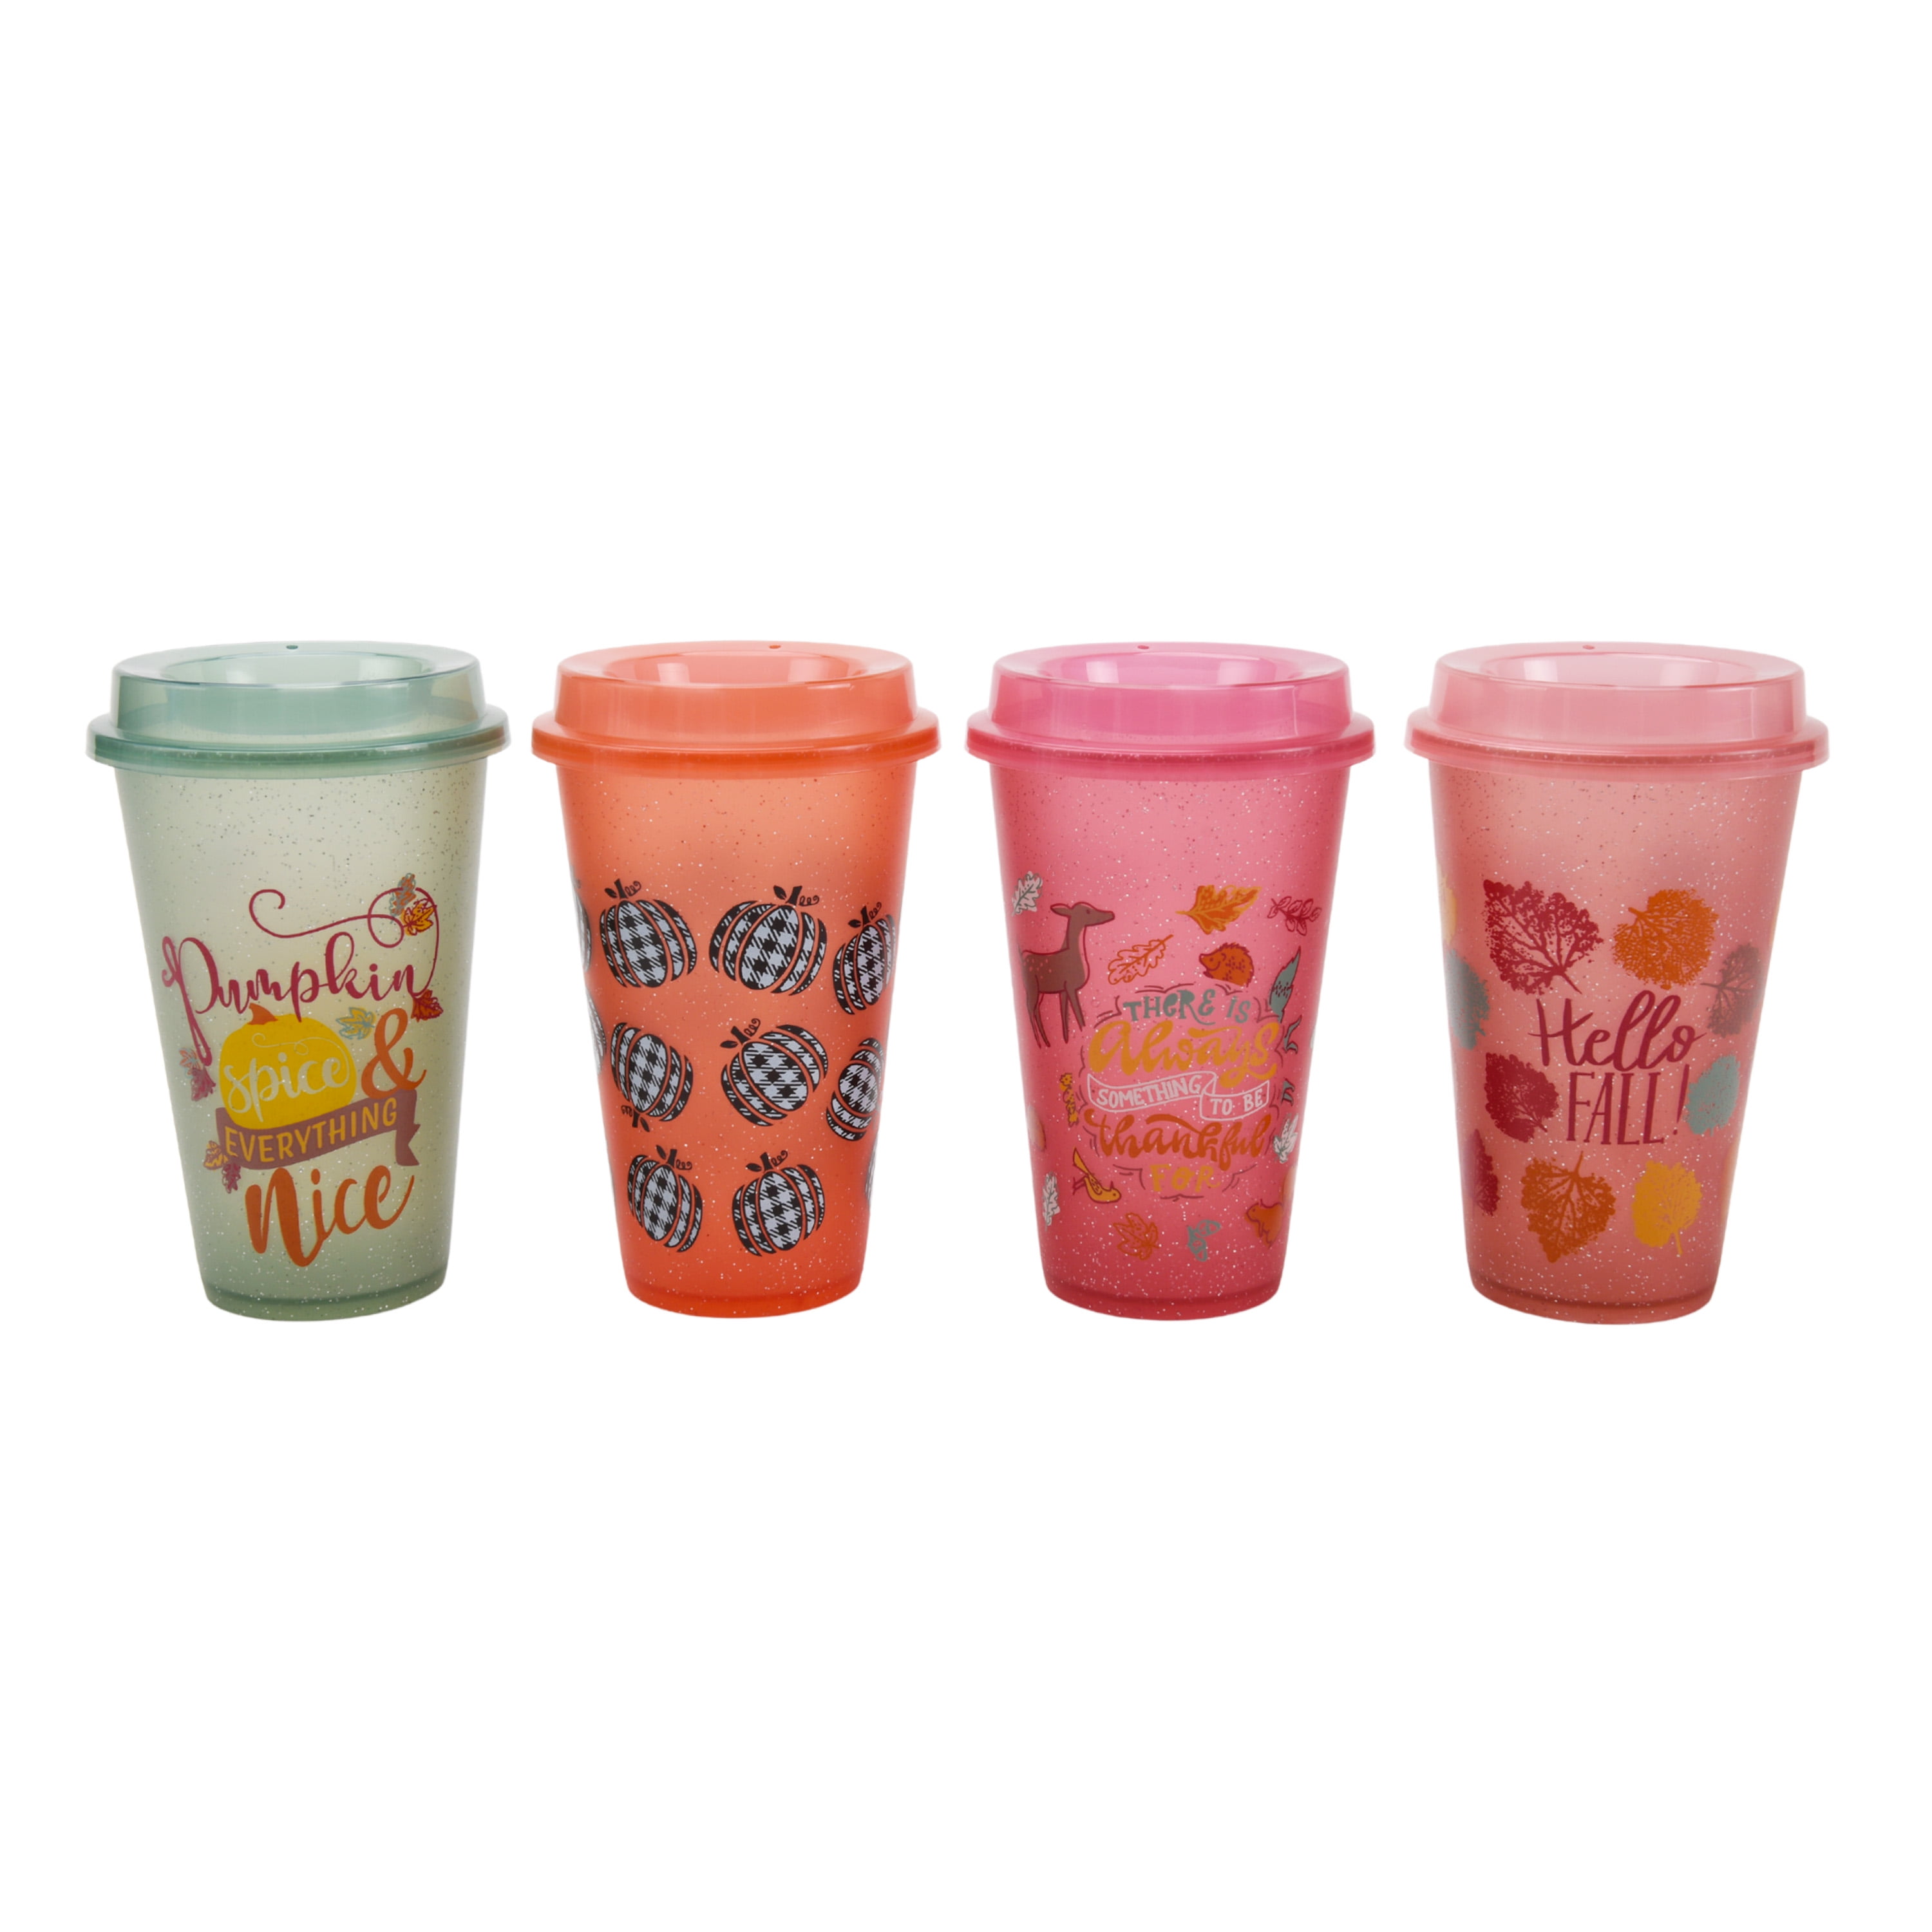 Triani Color Changing Tumbler Cups For Hot Drink - 5 Pcs 16oz Plastic  Tumblers Coffee Cups with Lids - Reusable Travel Cup to Go Coffee Cup 